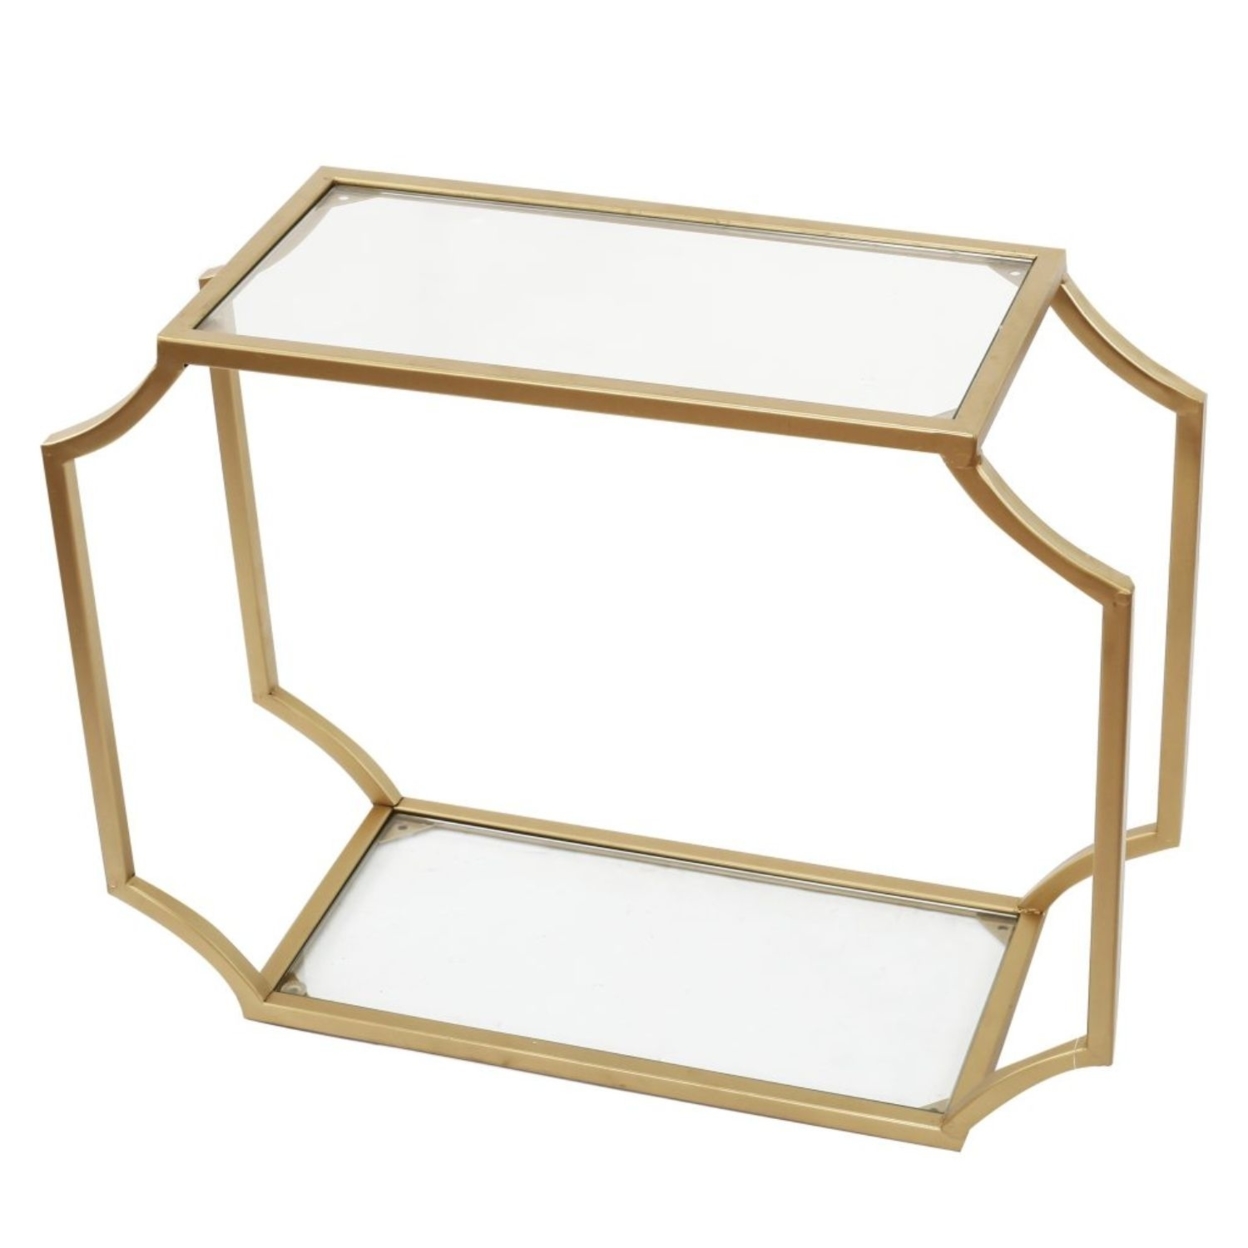 Metal Wall Shelf With Two Glass Shelves And Smooth Chamfered Corners, Gold And Clear- Saltoro Sherpi